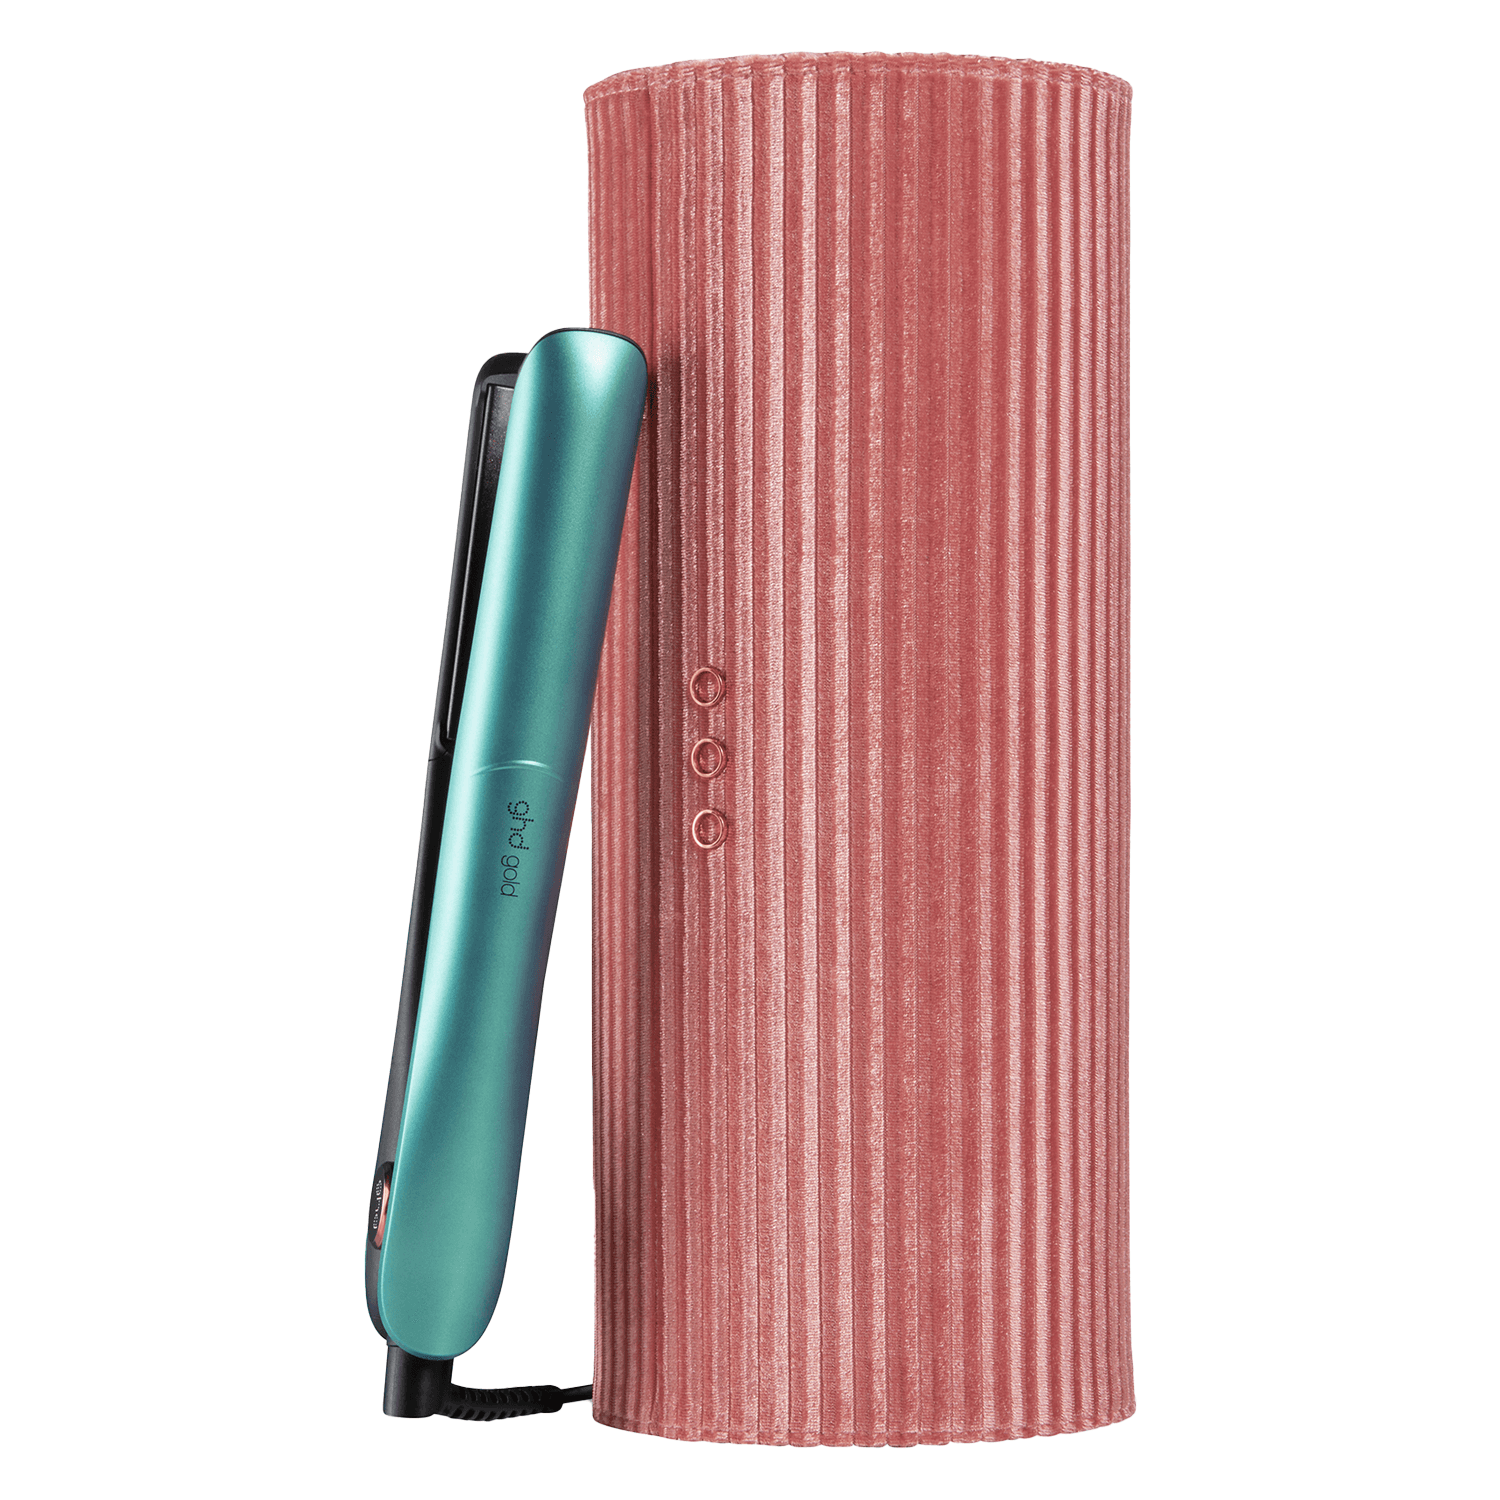 ghd tools - Dreamland Collection  Le Gold